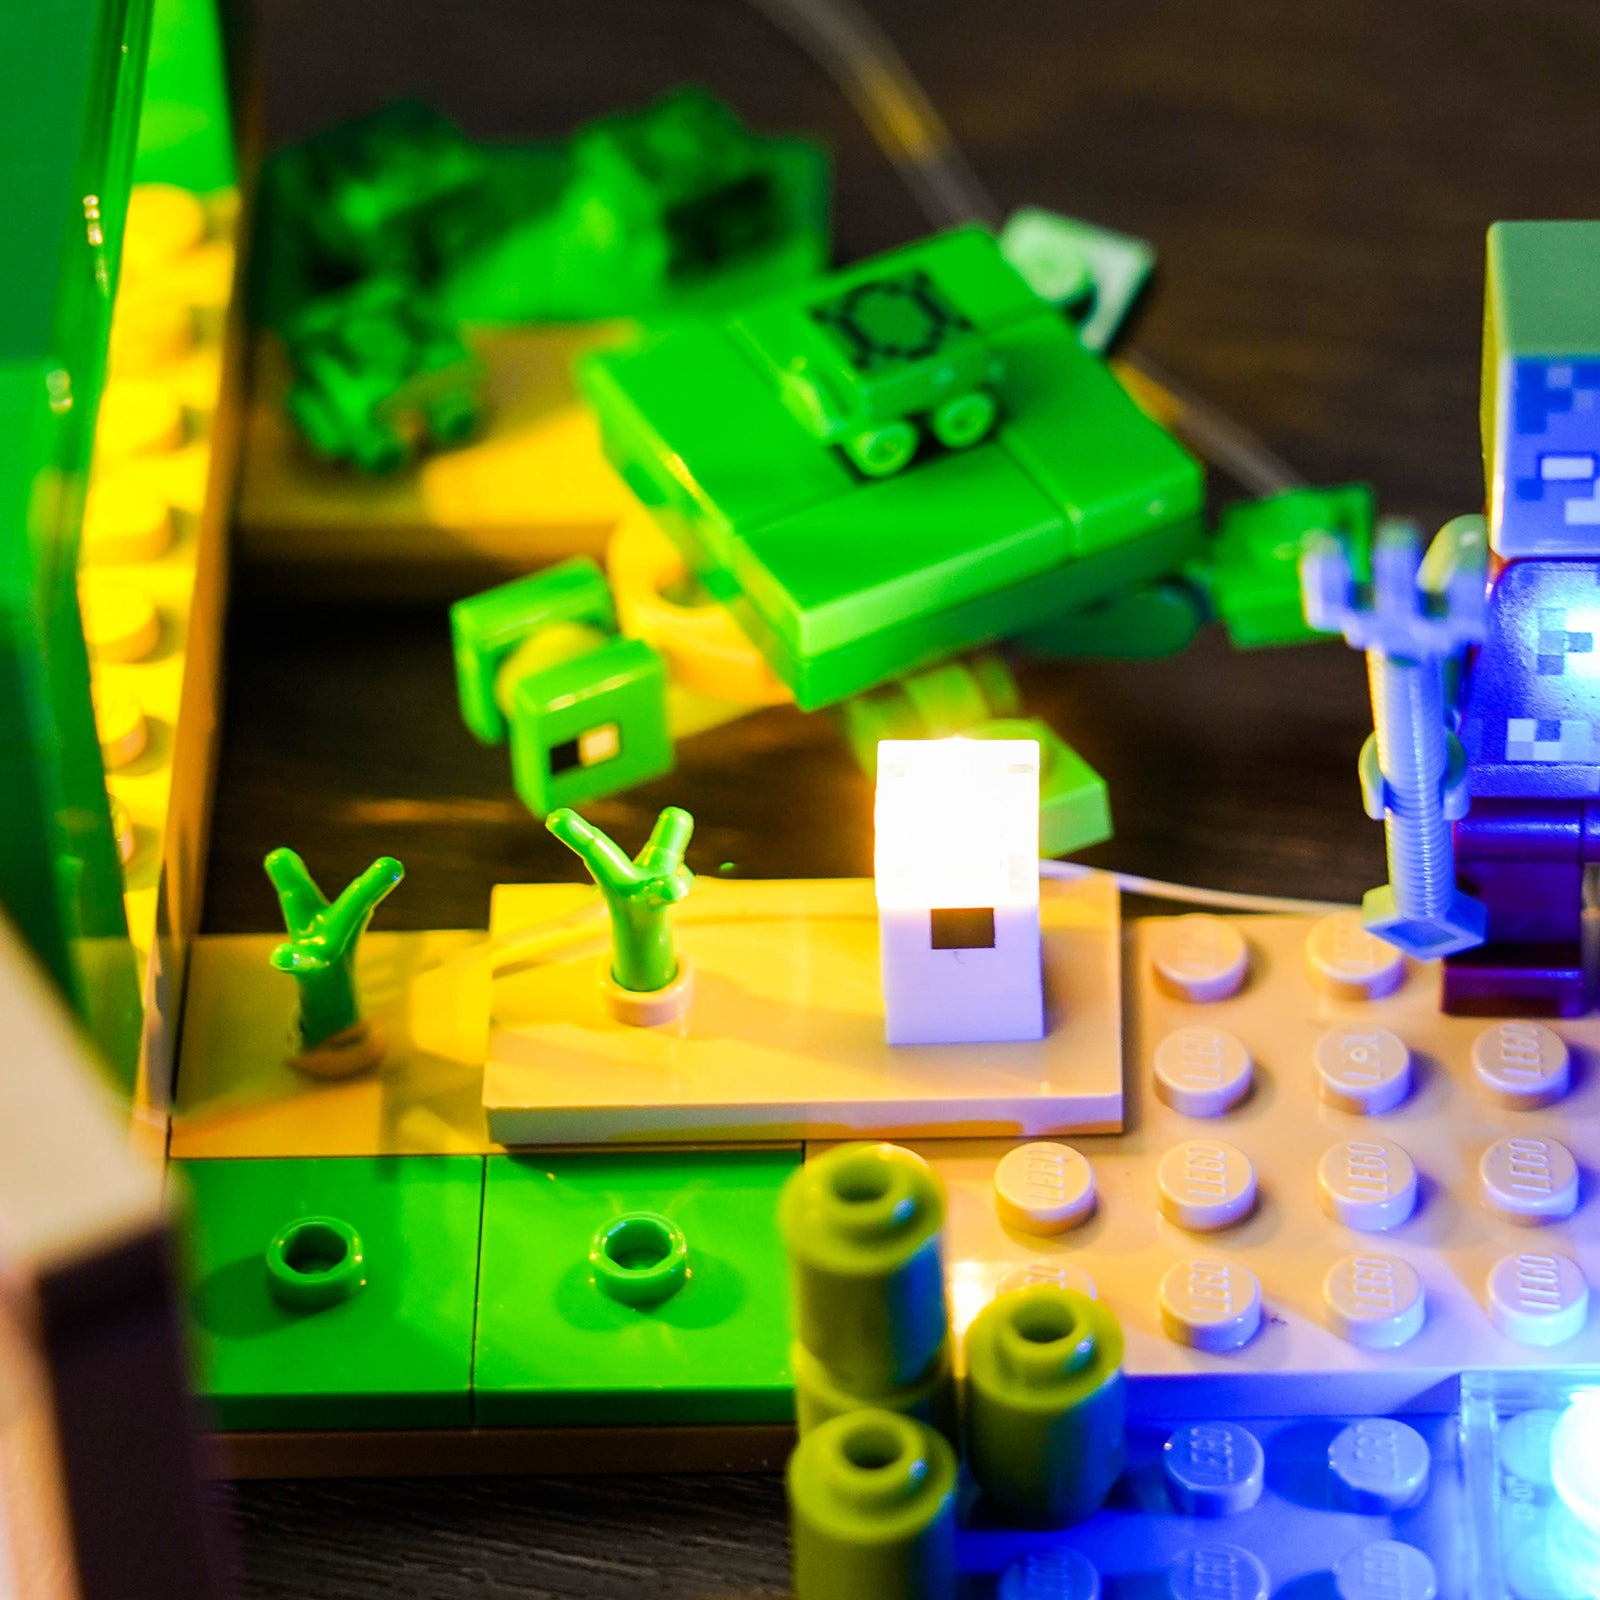 Details display of The Turtle Beach House with BrickBling LEGO light